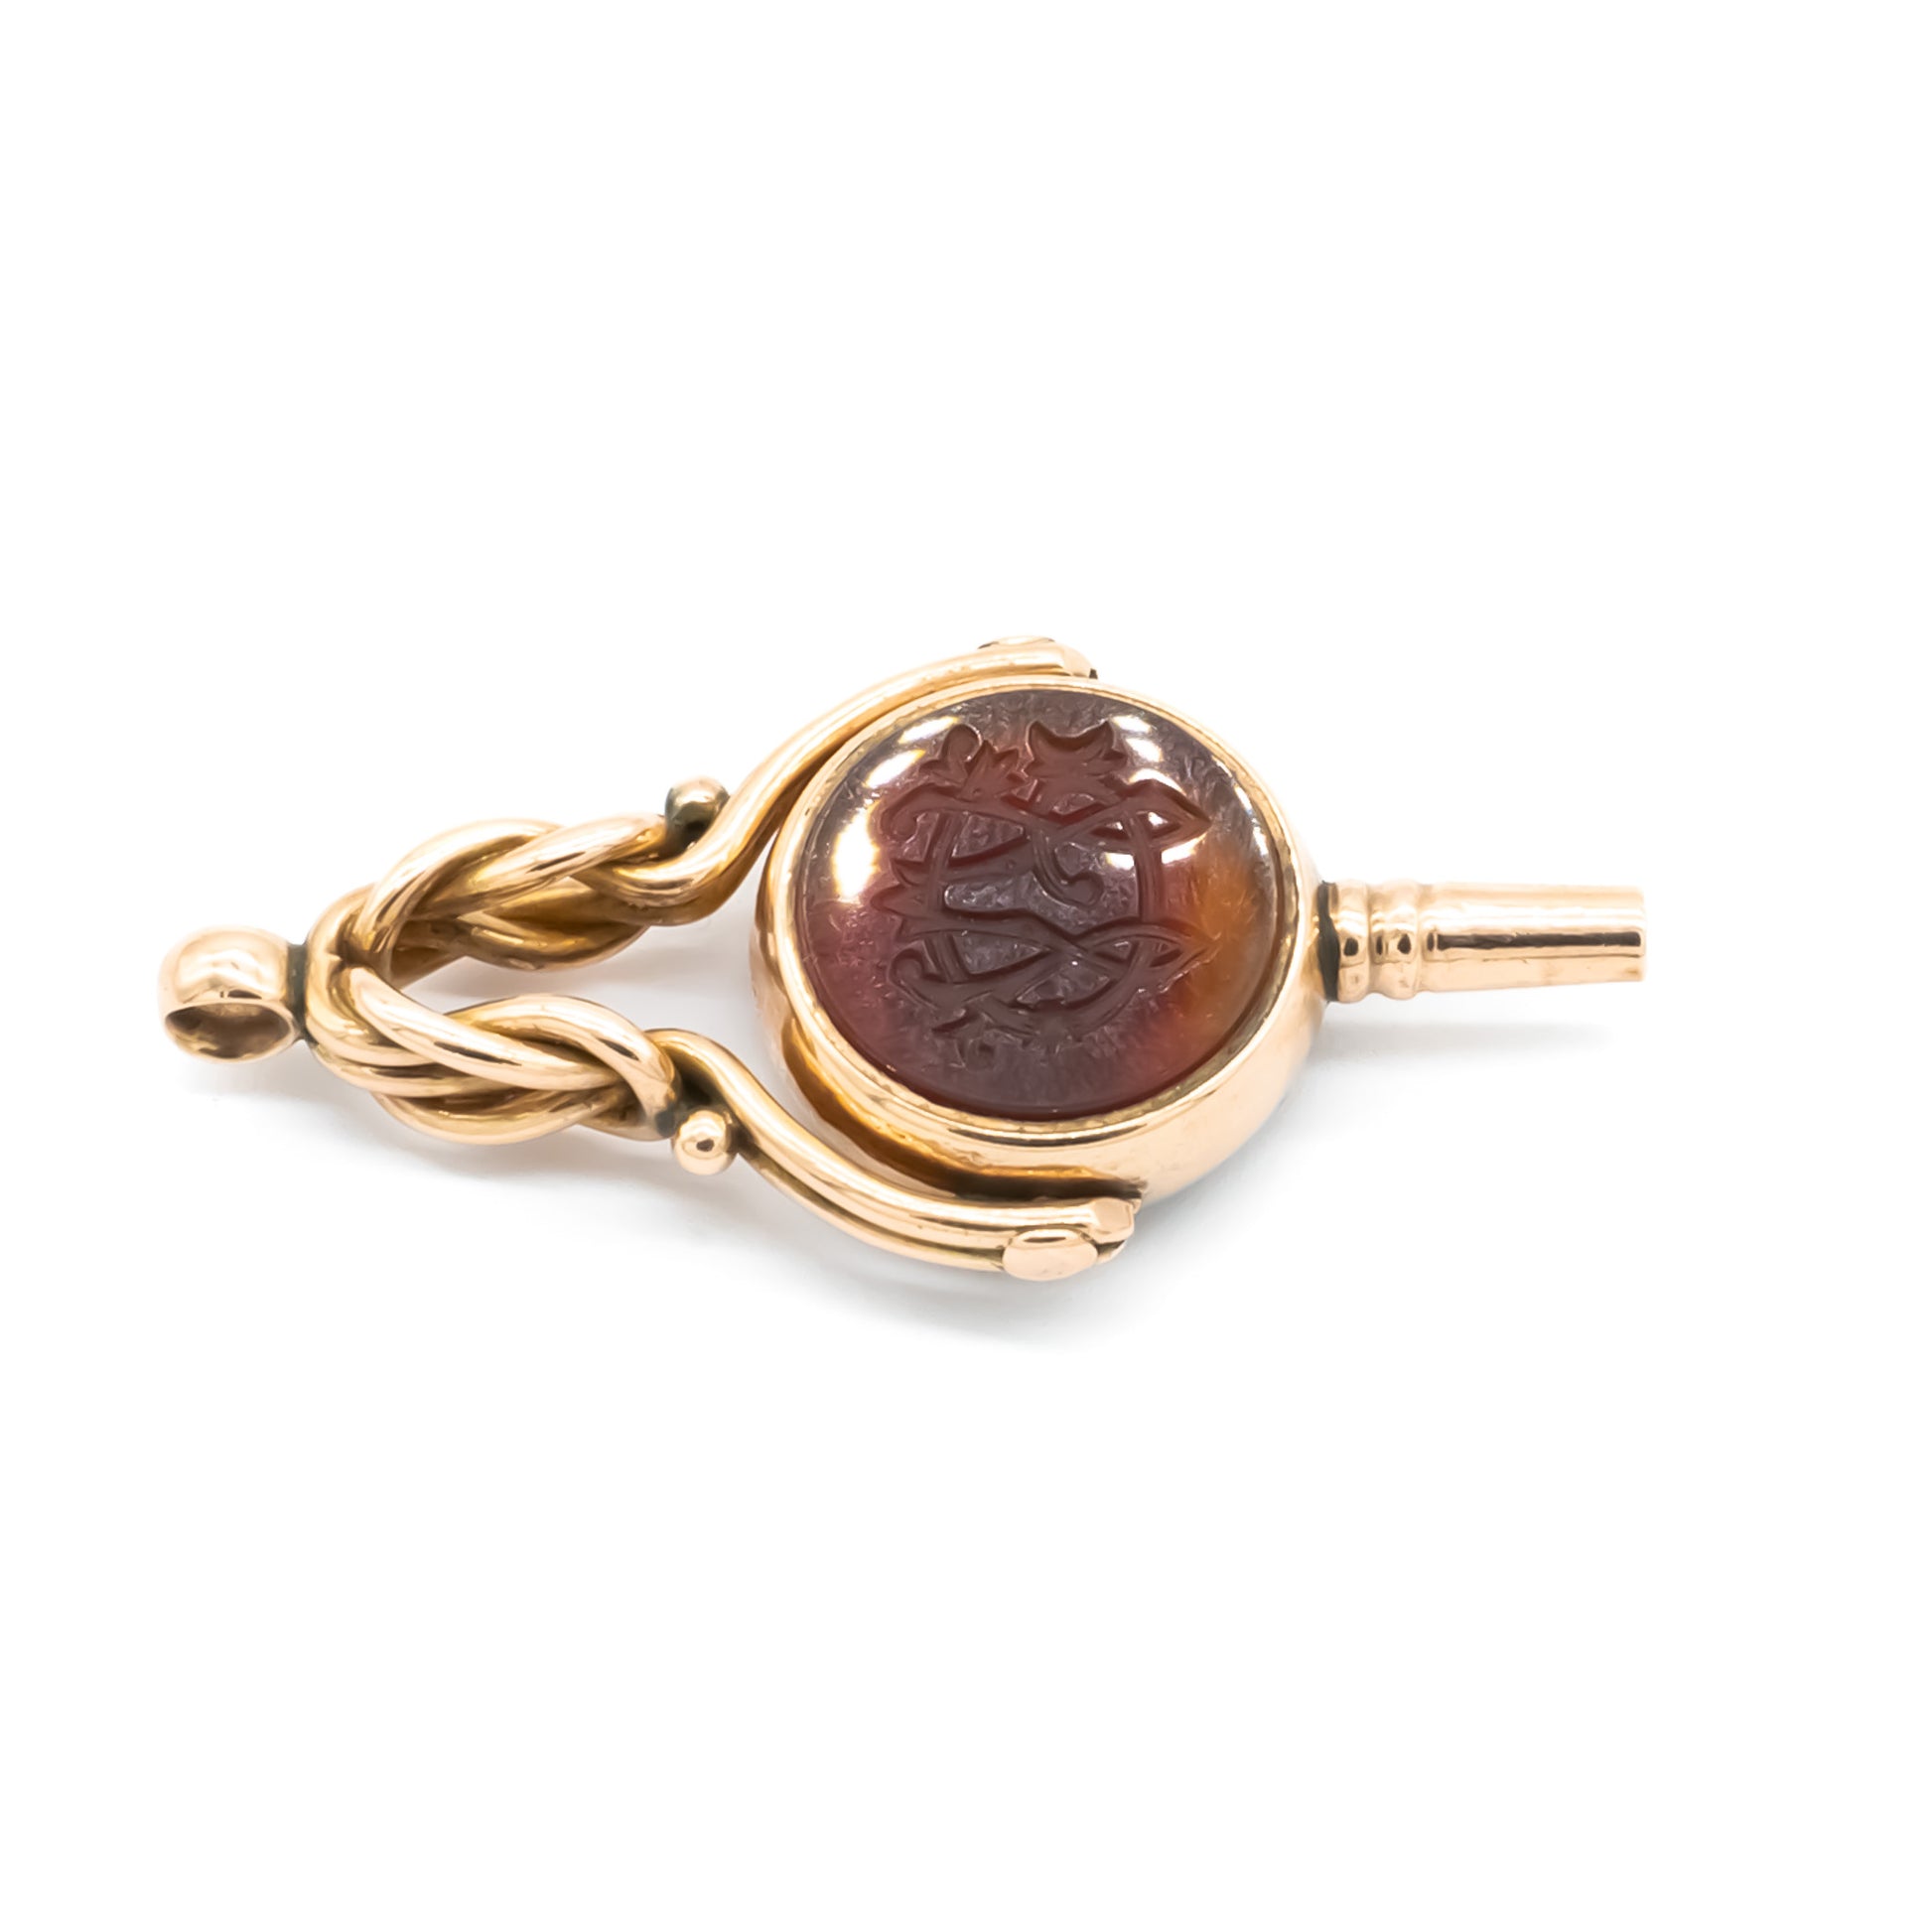 Classic Victorian 9ct rose gold swivel seal/watch key set with a carnelian intaglio and sardonyx.